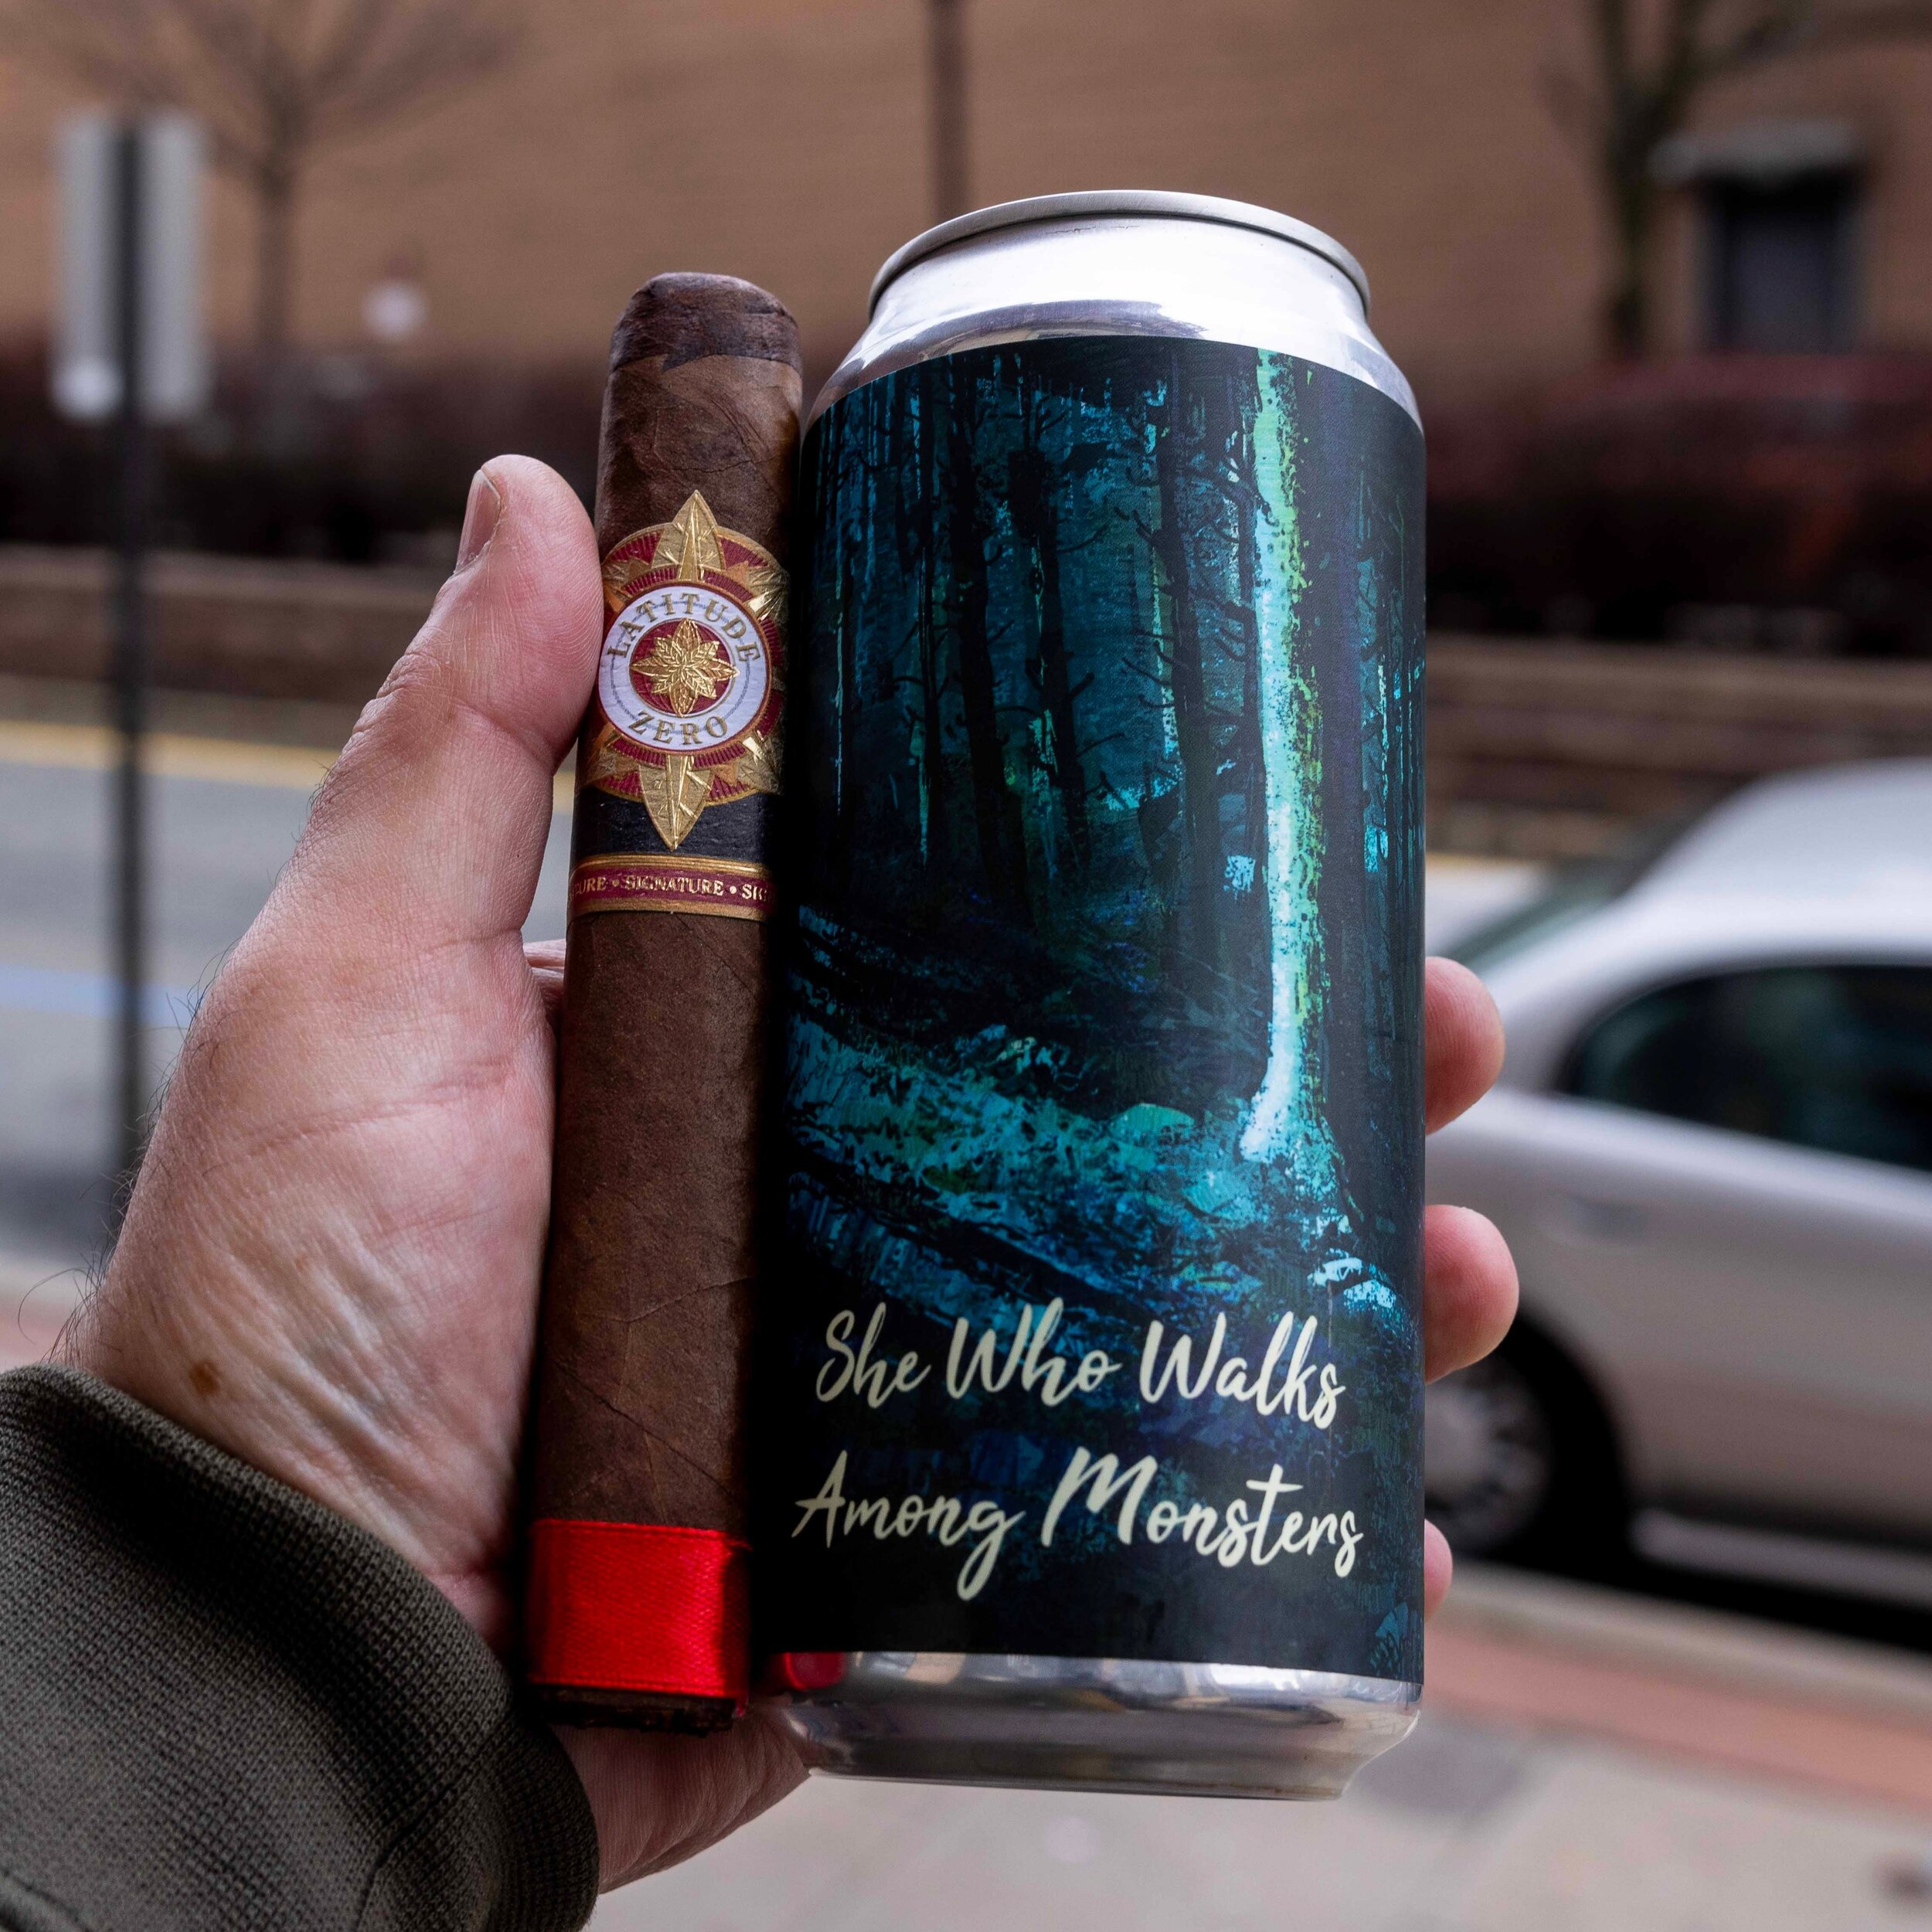 She Who Walks Among Monsters: The Beer That Thinks It&rsquo;s a Gothic Novel.

Cigar: Latitude Zero Signature Toro.